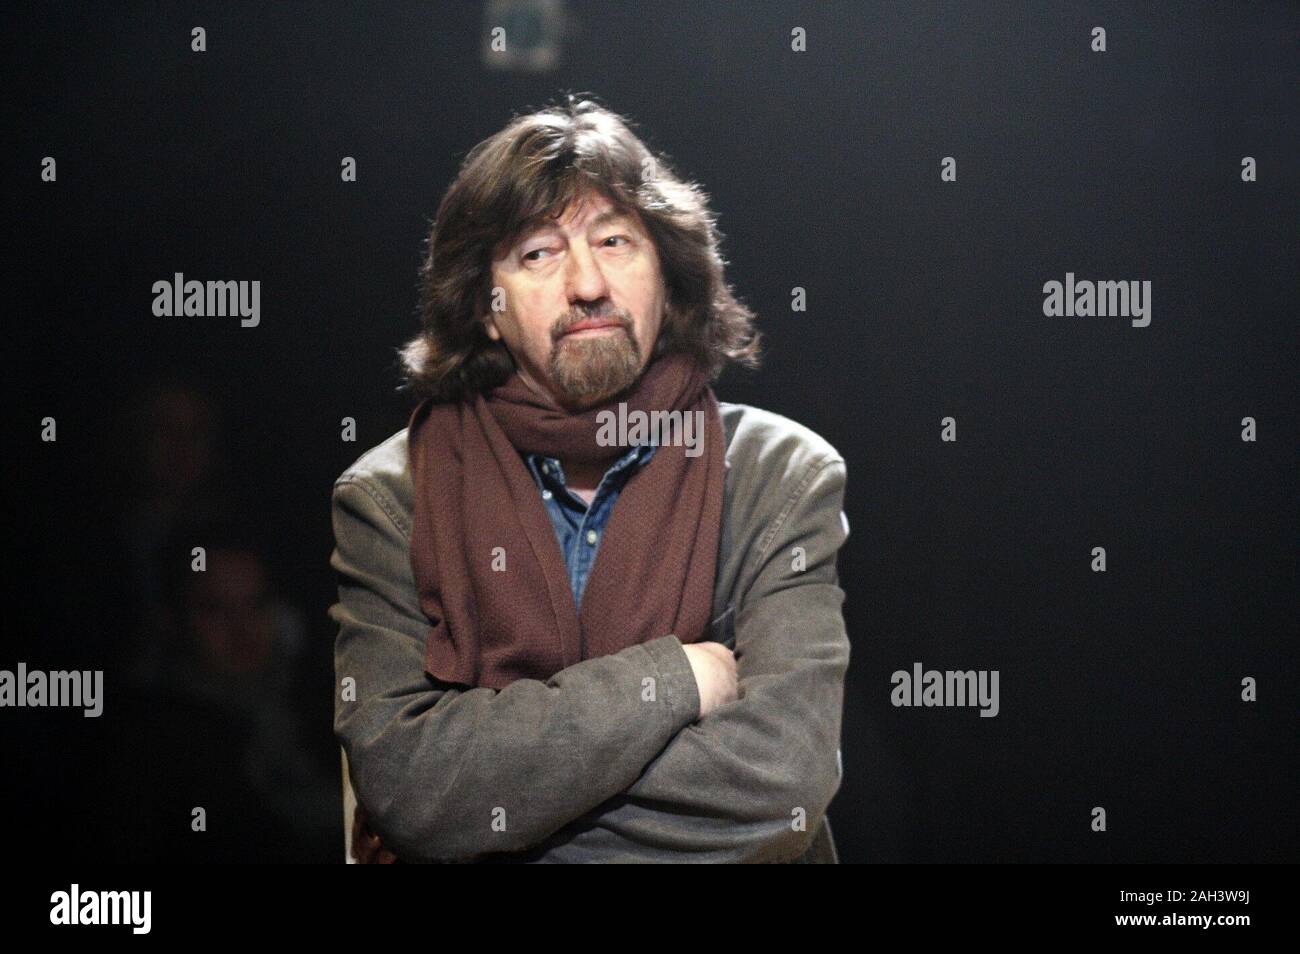 Trevor Nunn at a rehearsal of A LITTLE NIGHT MUSIC by Stephen Sondheim at the Menier Chocolate Factory, London in 2008   English theatre director born in Ipswich in 1940  attended Cambridge University  Artistic Director of the Royal Shakespeare Company (RSC) from 1968-1978 and of National Theatre, London 1997-2003  knighted in 2002   notable RSC productions include MACBETH with Judi Dench and Ian McKellen in 1976 and NICHOLAS NICKLEBY in 1980  directed PORGY AND BESS at Glyndebourne Festival Opera in 1986, revived at the Royal Opera in 1992 director of major musicals including CATS, LES MISERA Stock Photo